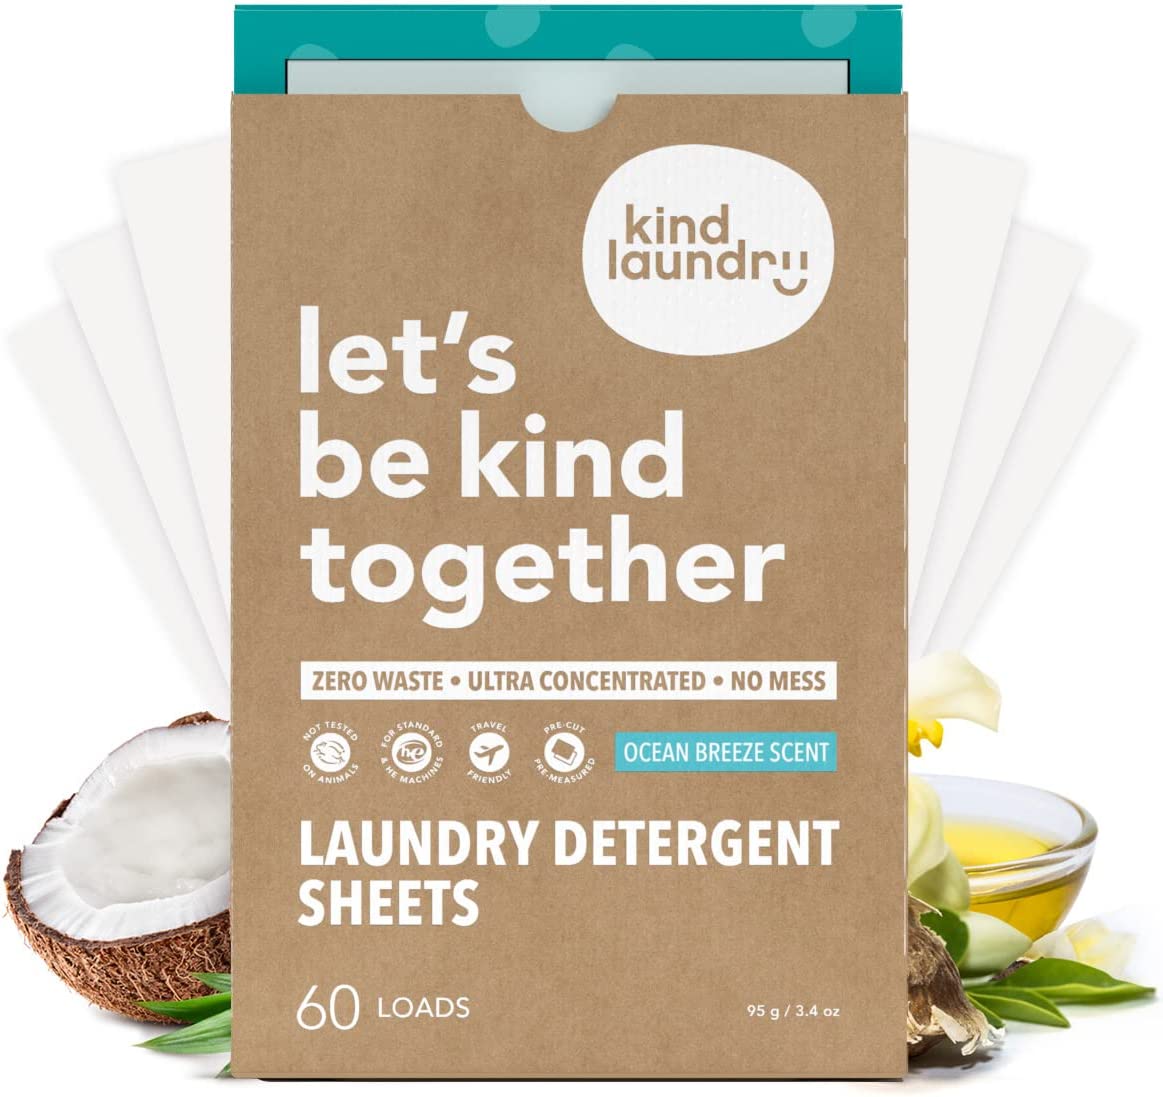 https://www.oldhouseonline.com/oho-html/review/wp-content/uploads/2023/04/kind-laundry-detergent-sheets-old-house-journal.jpg